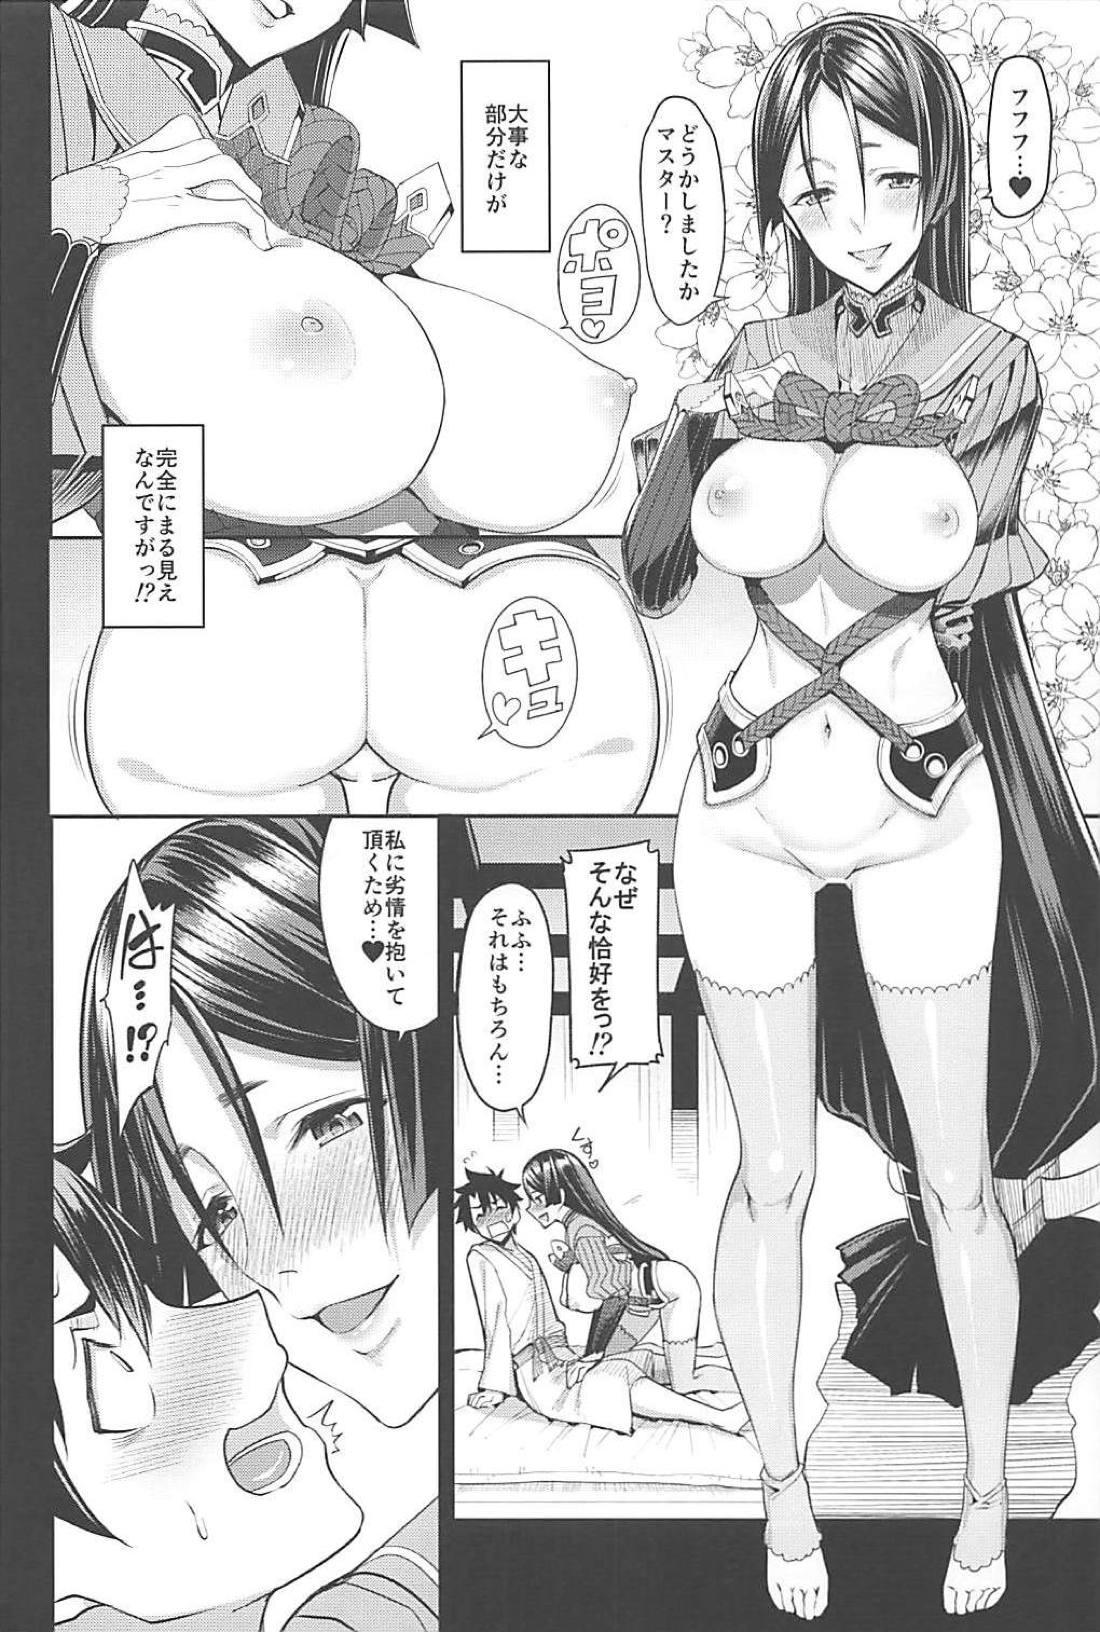 Thailand Another Personality - Fate grand order Old Young - Page 5